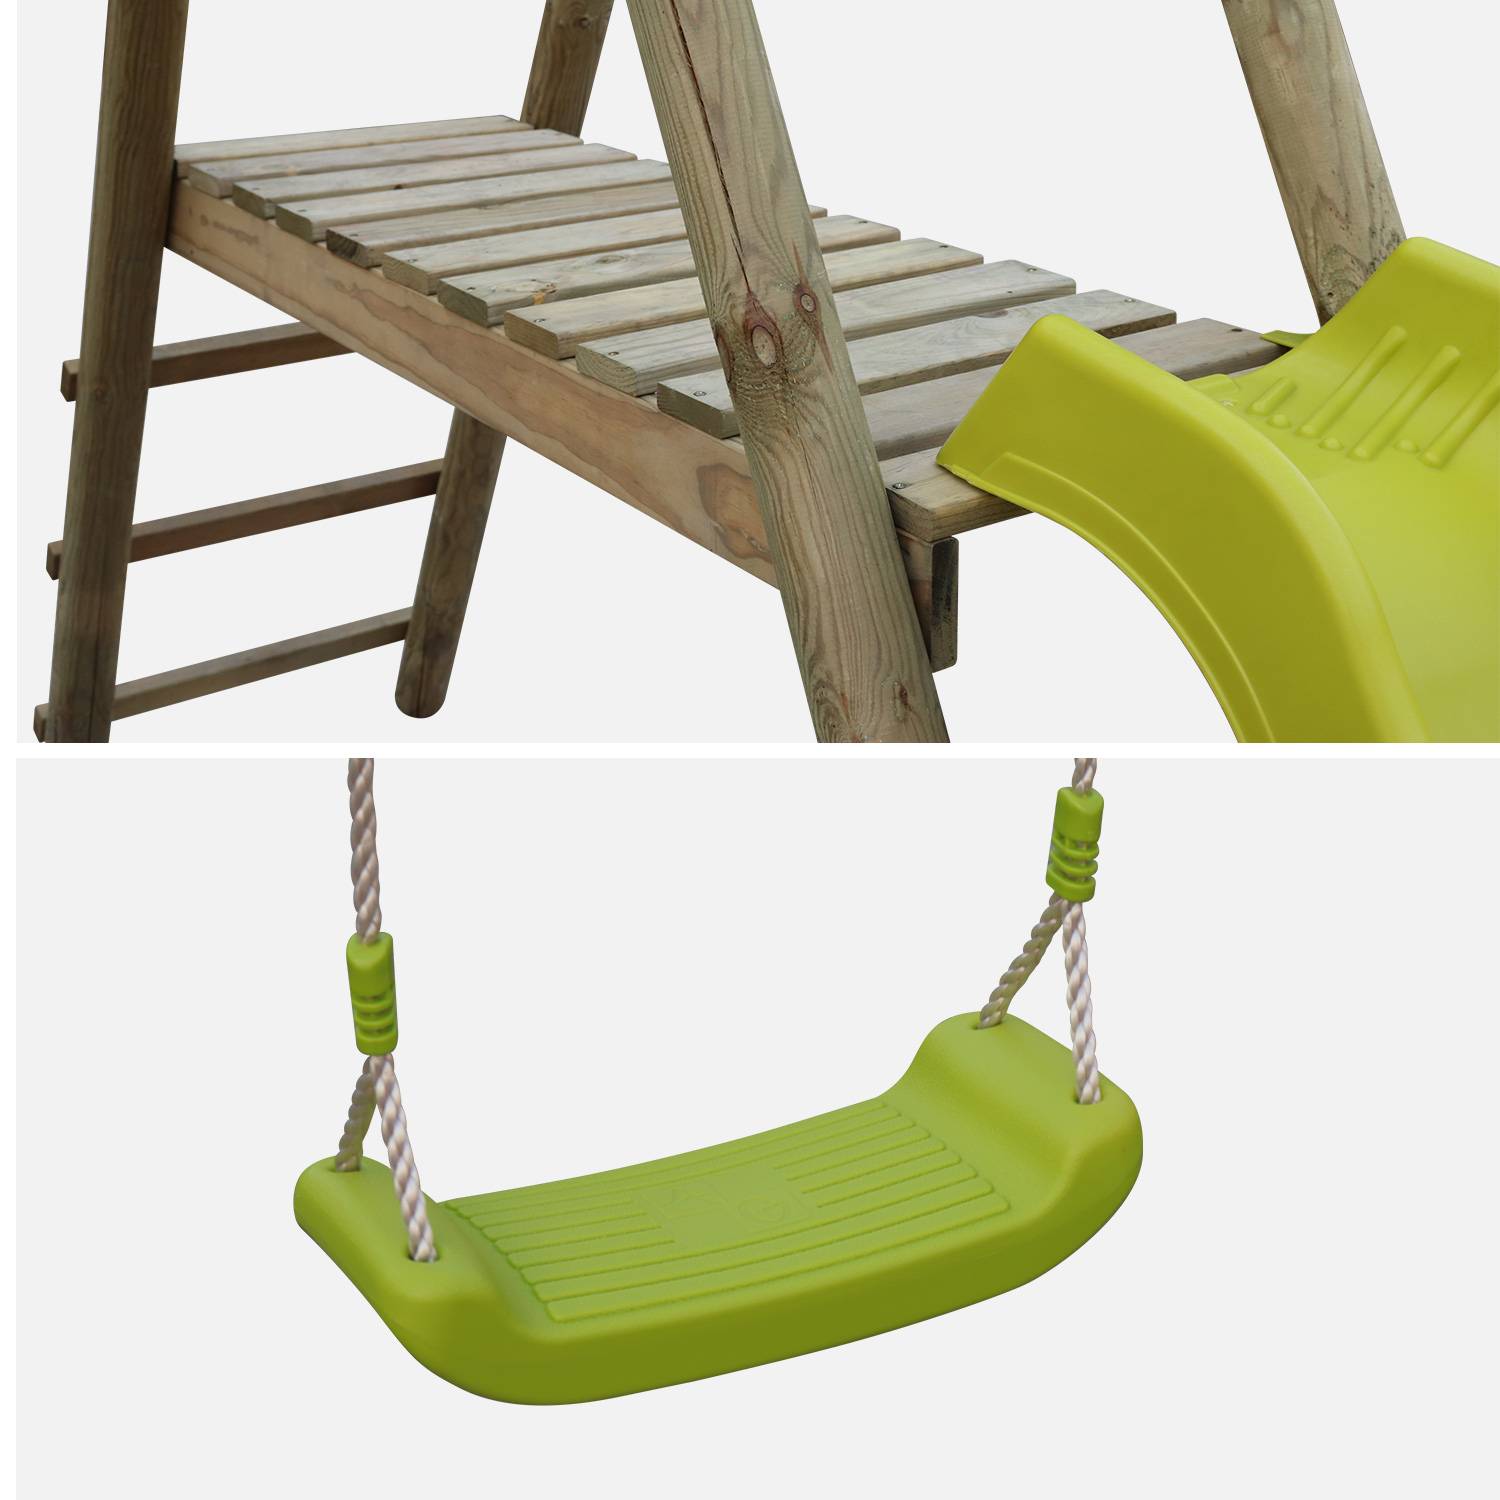 Wooden garden multiplay with slide, two swings and face to face glider - pressure treated FSC pine - Marin,sweeek,Photo4